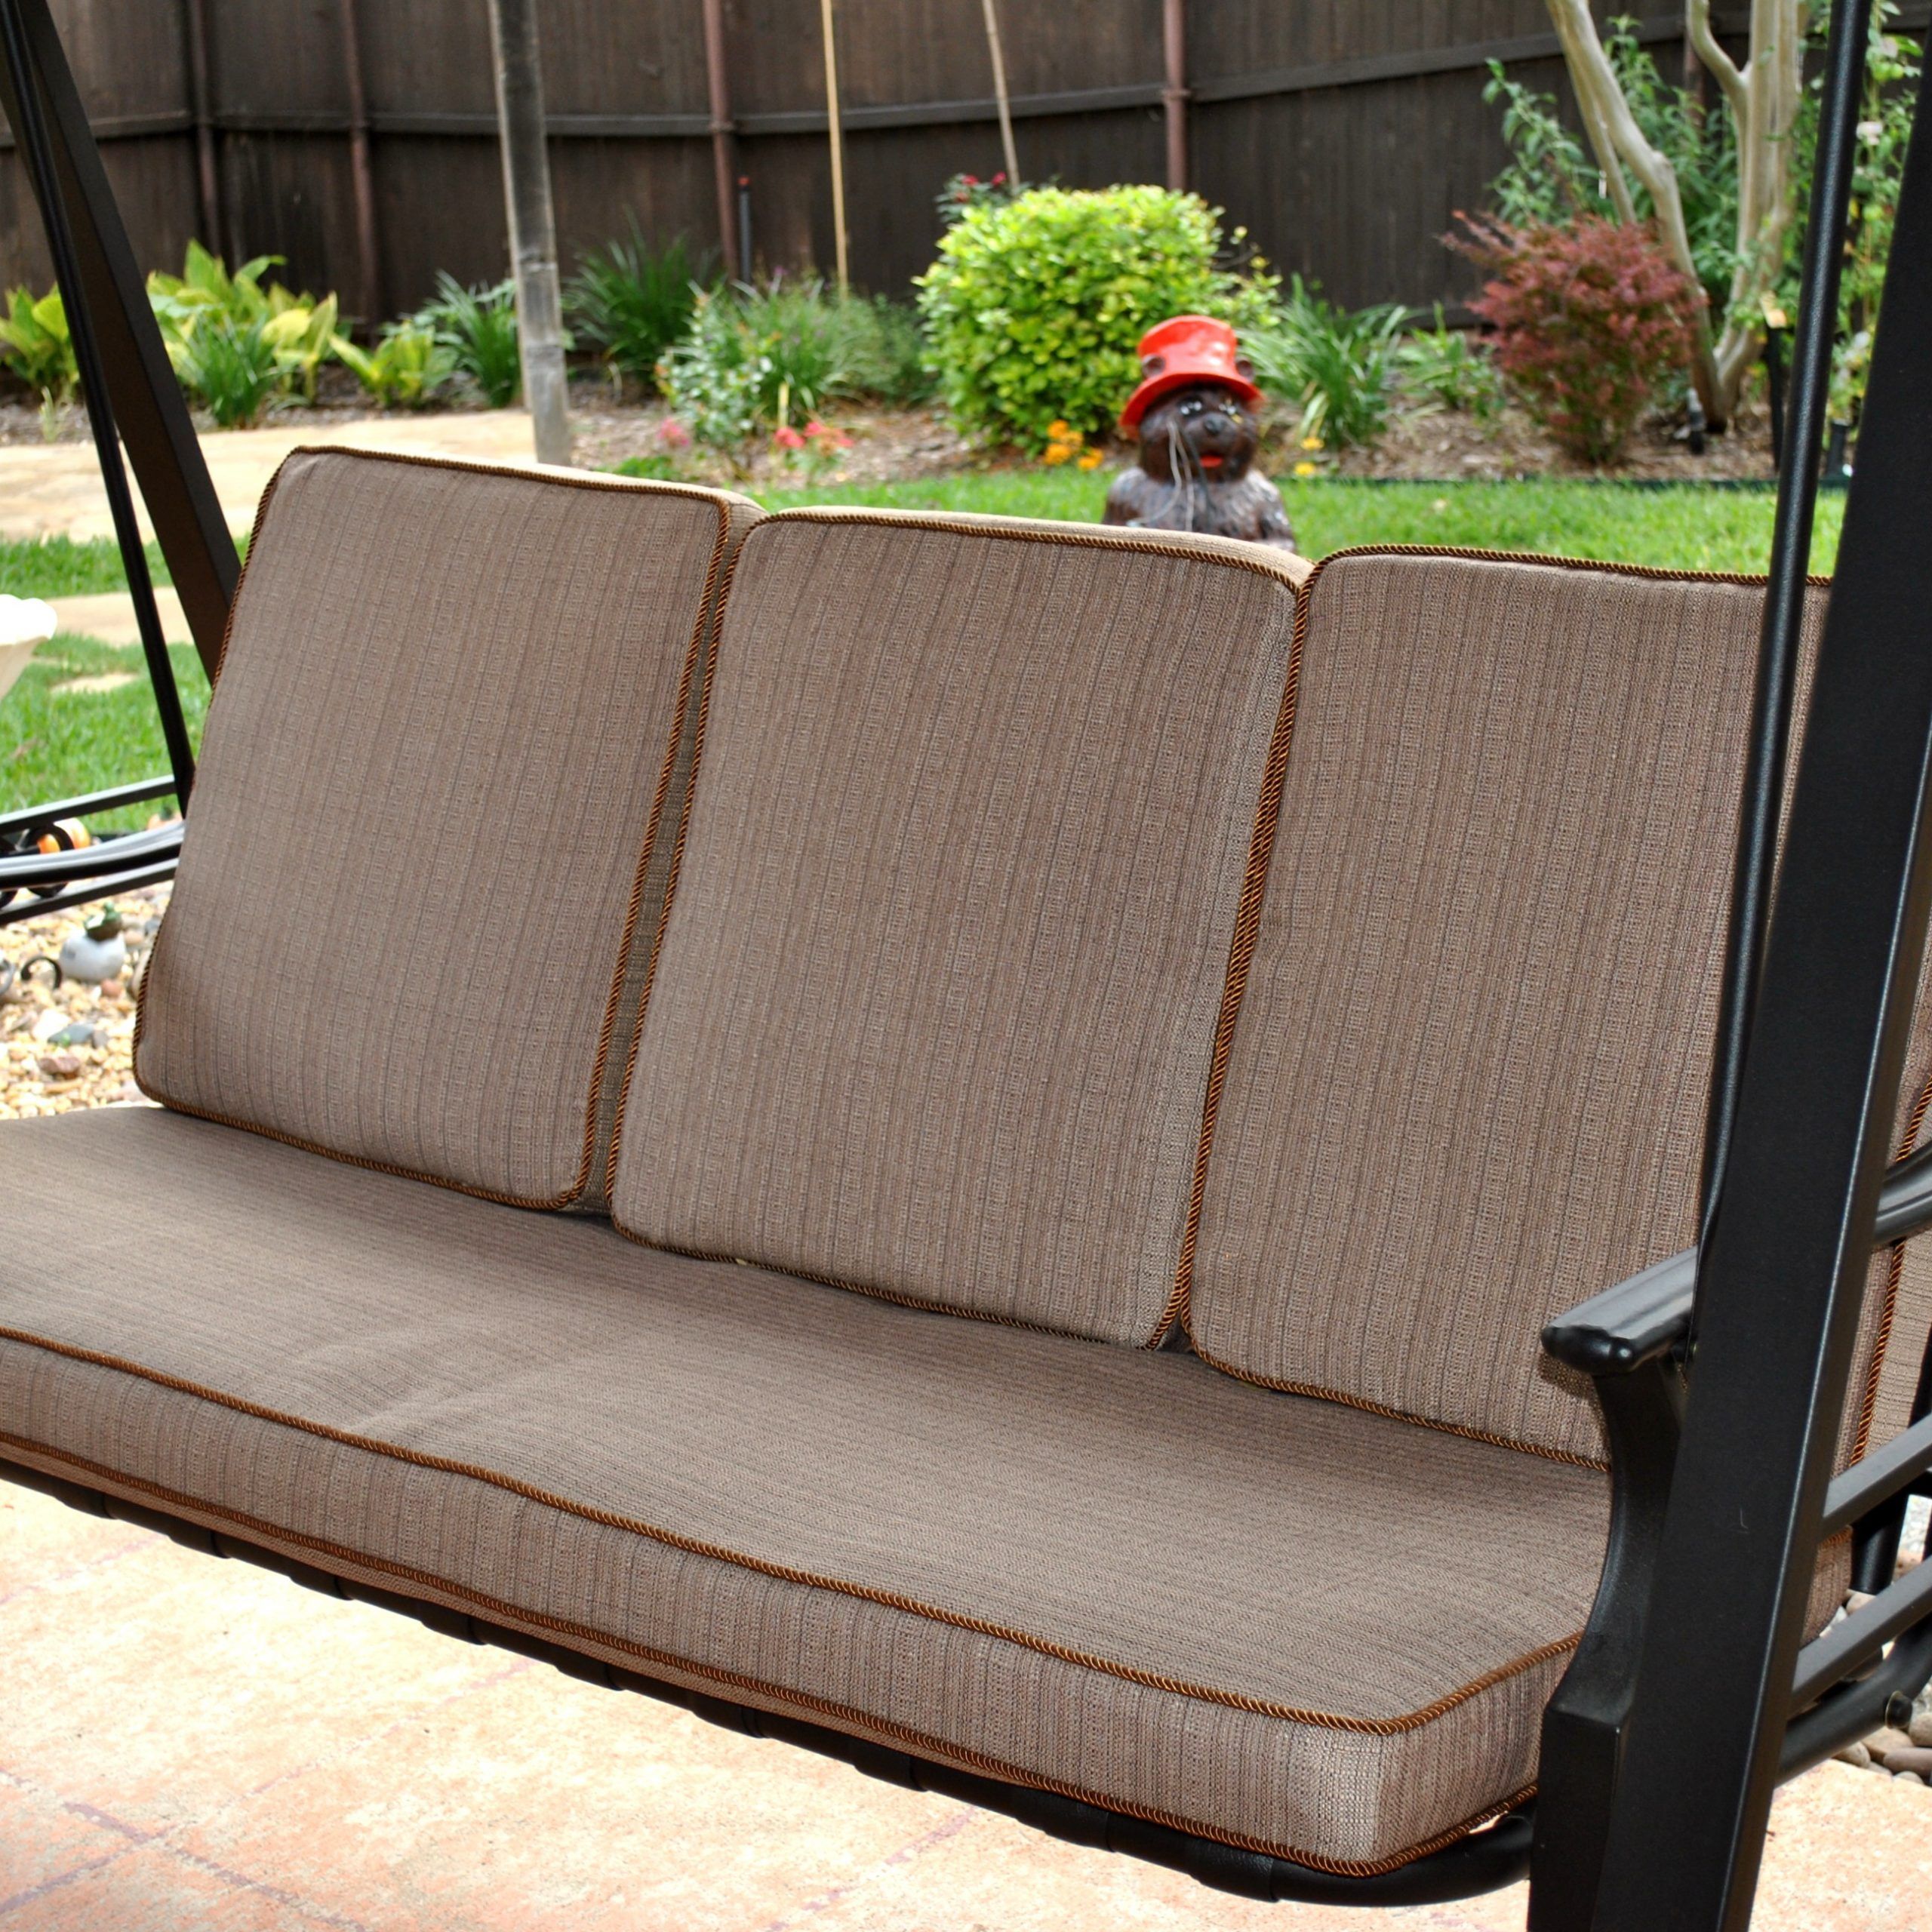 Lovely Outside Swing Cushions Cushion Ideas 261942 – Cushion Intended For Deluxe Cushion Sunbrella Porch Swings (Photo 17 of 25)